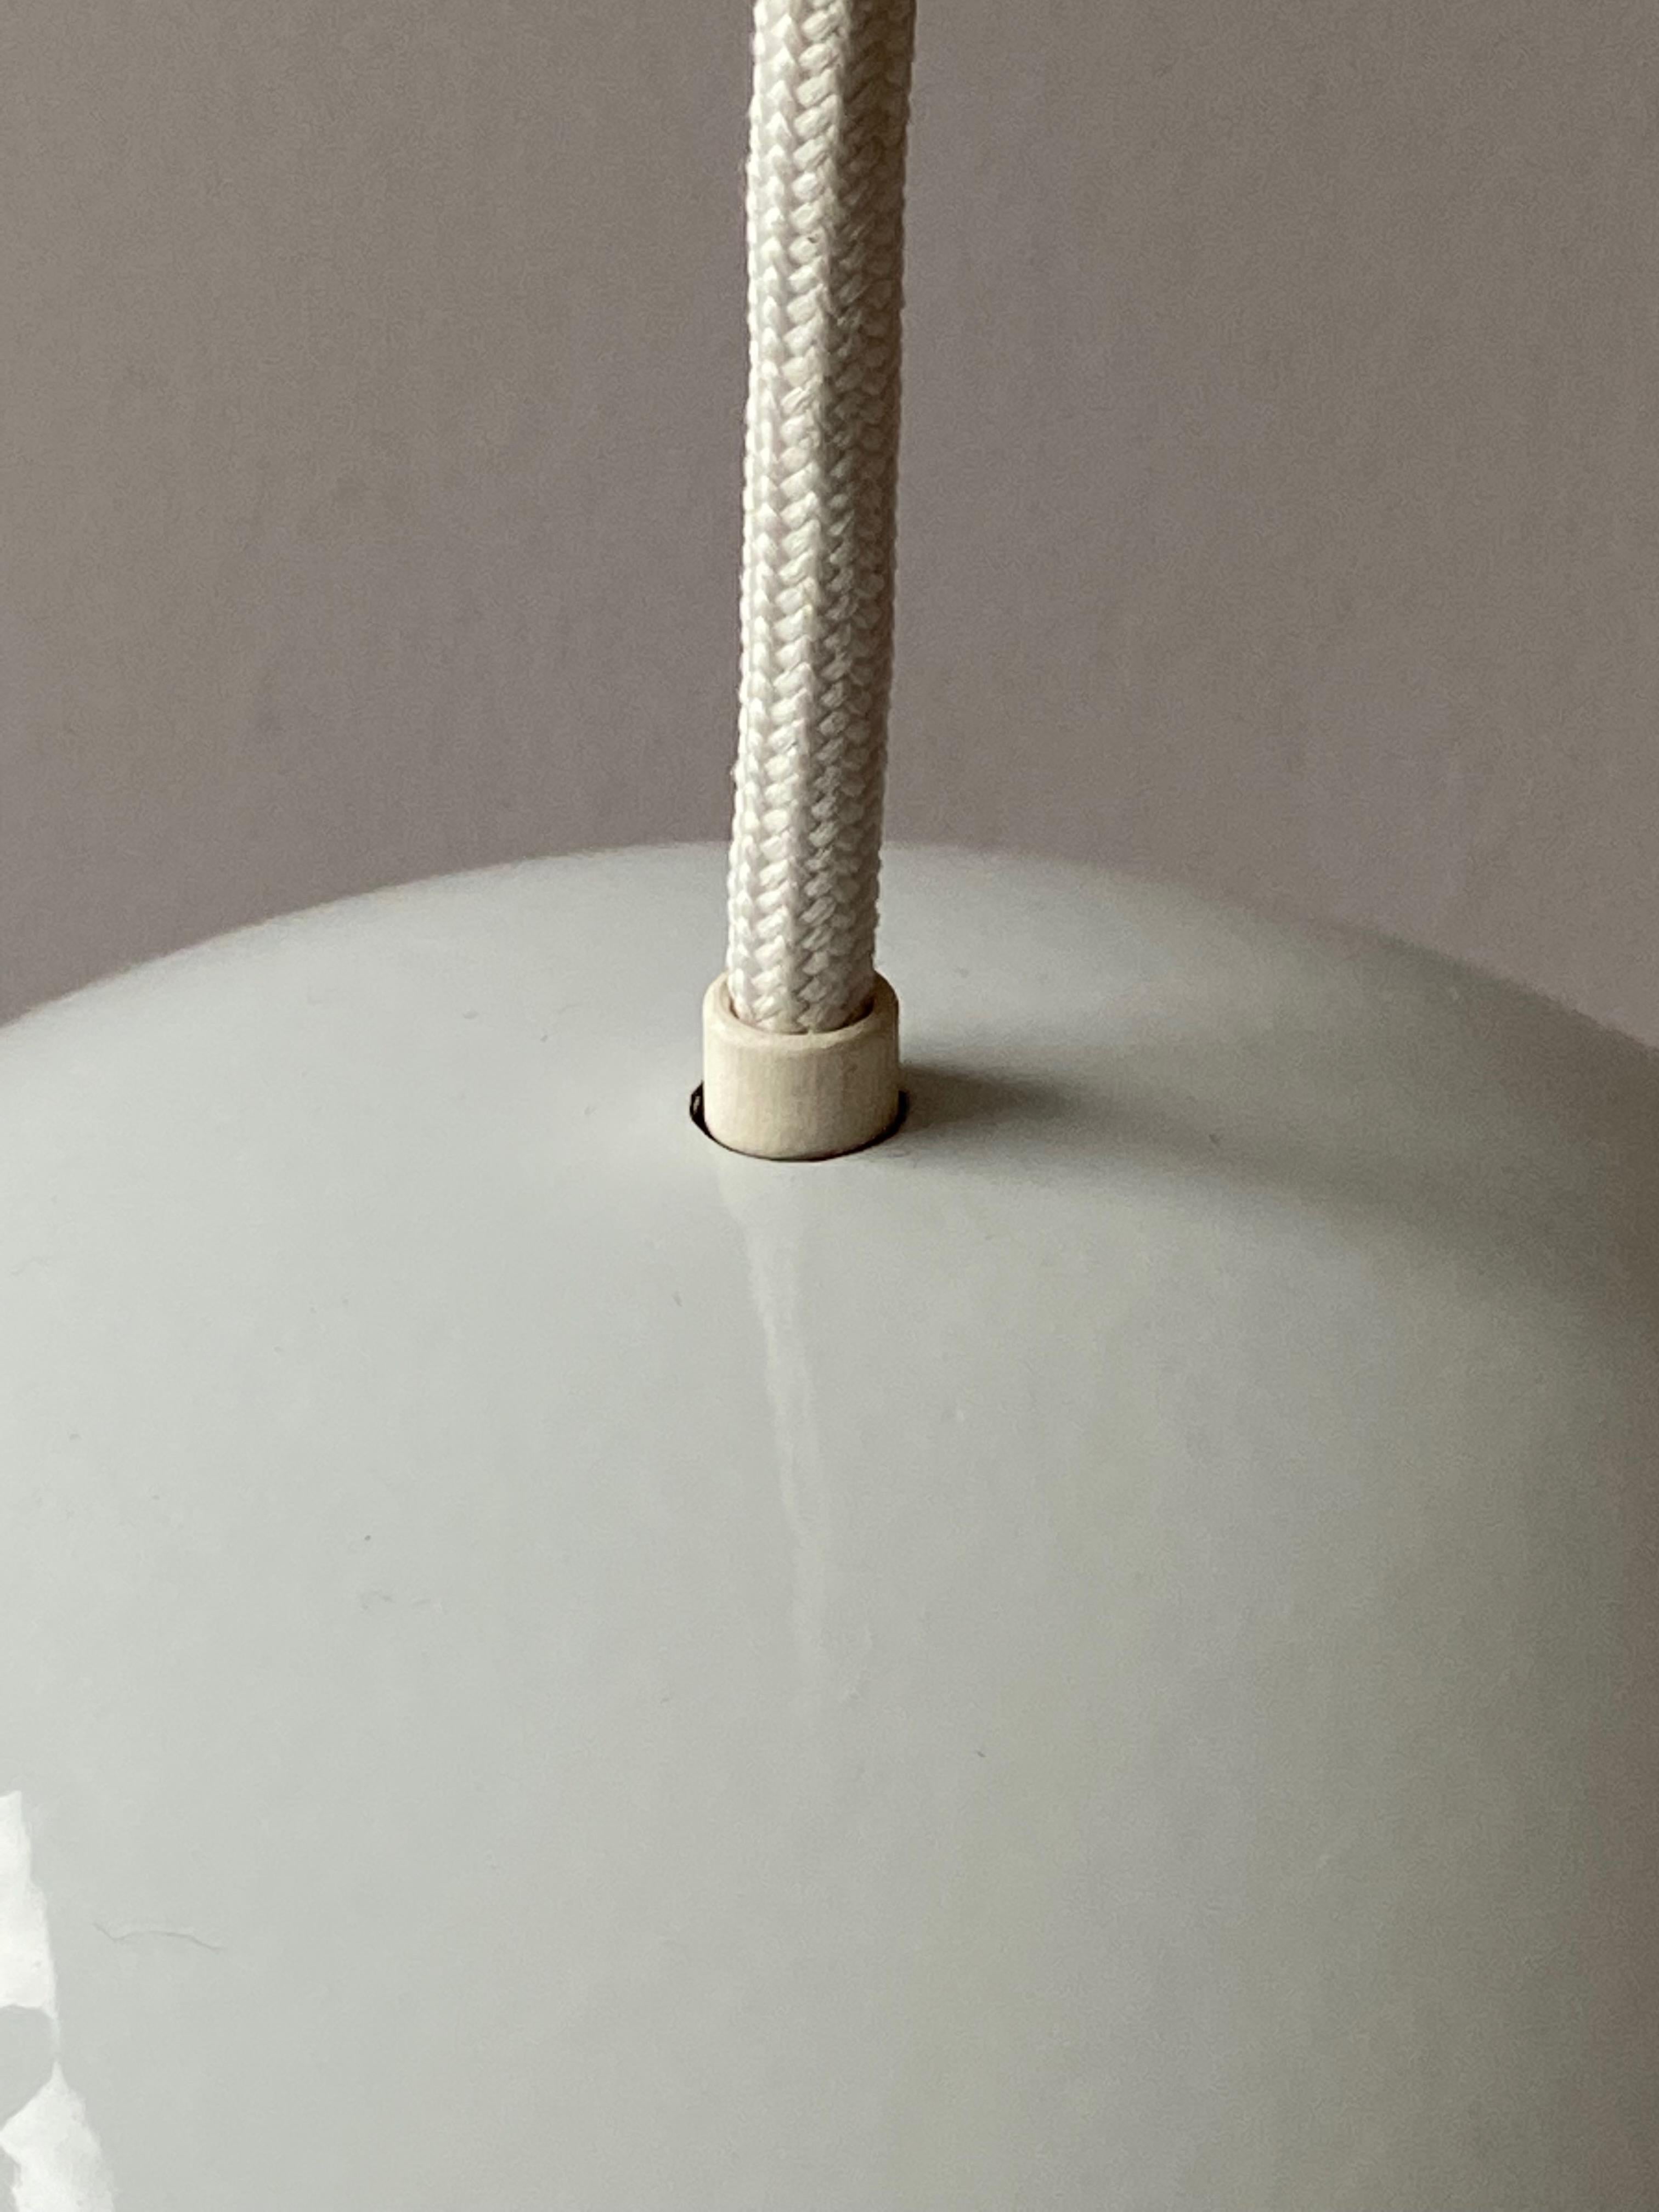 Very nice white enamel flowerpot pendant design Verner Panton Design 1968 produced by Louis Poulsen in 1989, Made in Denmark. In enameled metal no more in production. The lamp is in very good condition. No parts missing, no larger chips, nothing